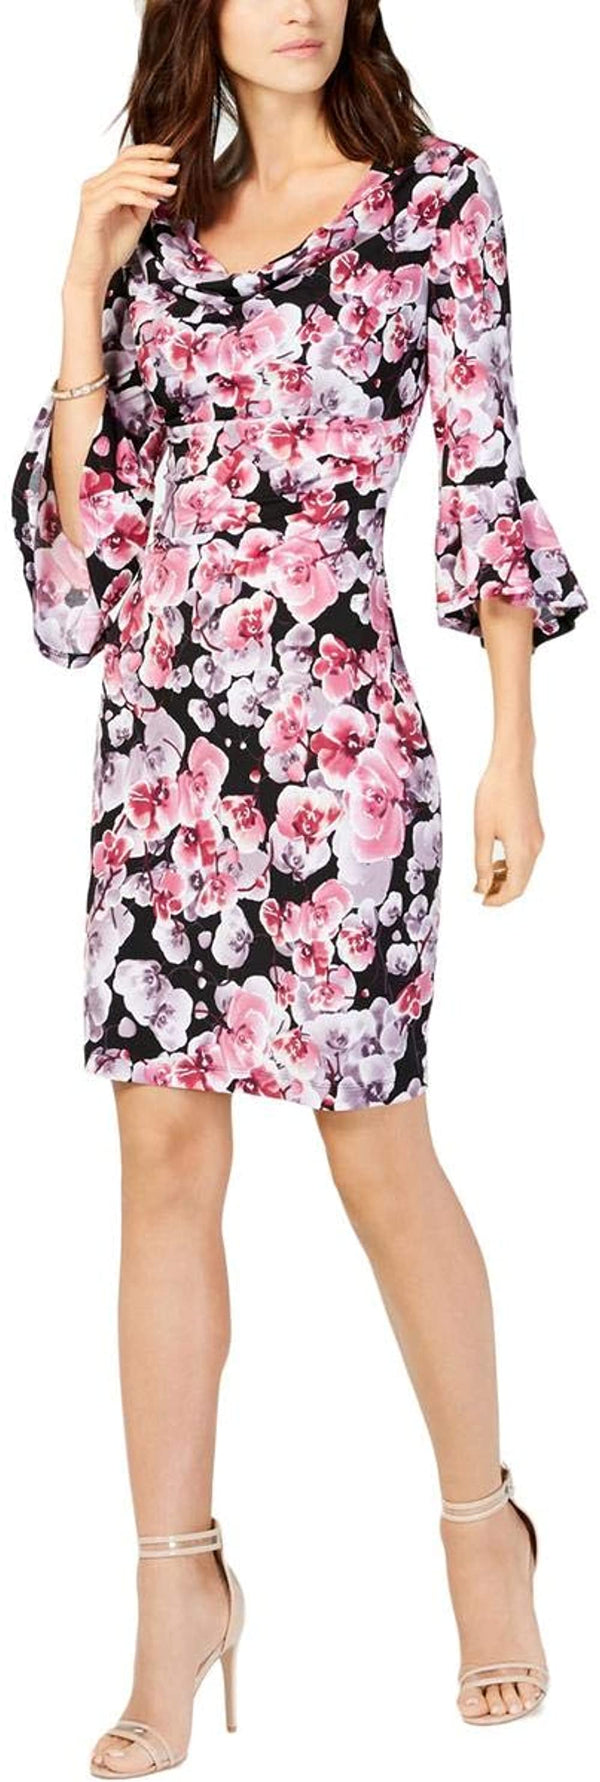 Connected Apparel Womens Floral Print A Line Dress